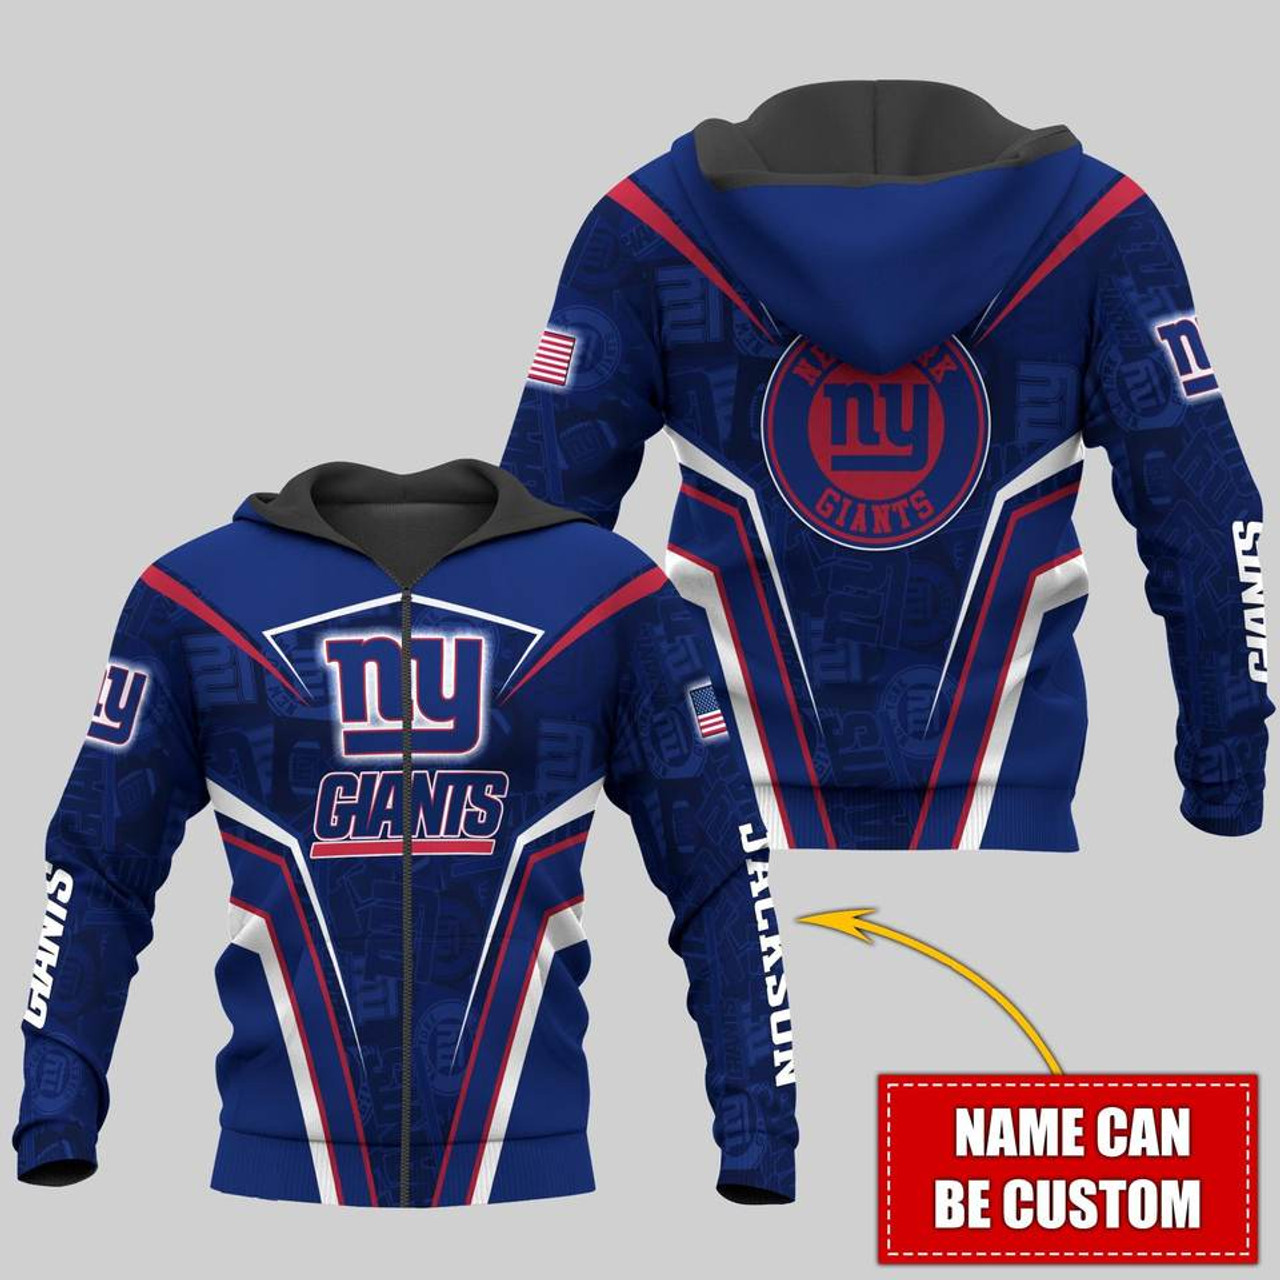 **(N.F.L.NEW-YORK-GIANTS-TEAM-PULLOVER-HOODIES & TEAM-SWEATPANTS-SET/OFFICIAL-CUSTOM-GIANTS-TEAM-LOGOS & OFFICIAL-GIANTS-TEAM-COLORS/ADD-YOUR-OWN-PERSONALIZED-NAME-OR-CUSTOMIZED-TEXT/WARM-PREMIUM-N.F.L.GIANTS-TEAM-COMBO-SET)**